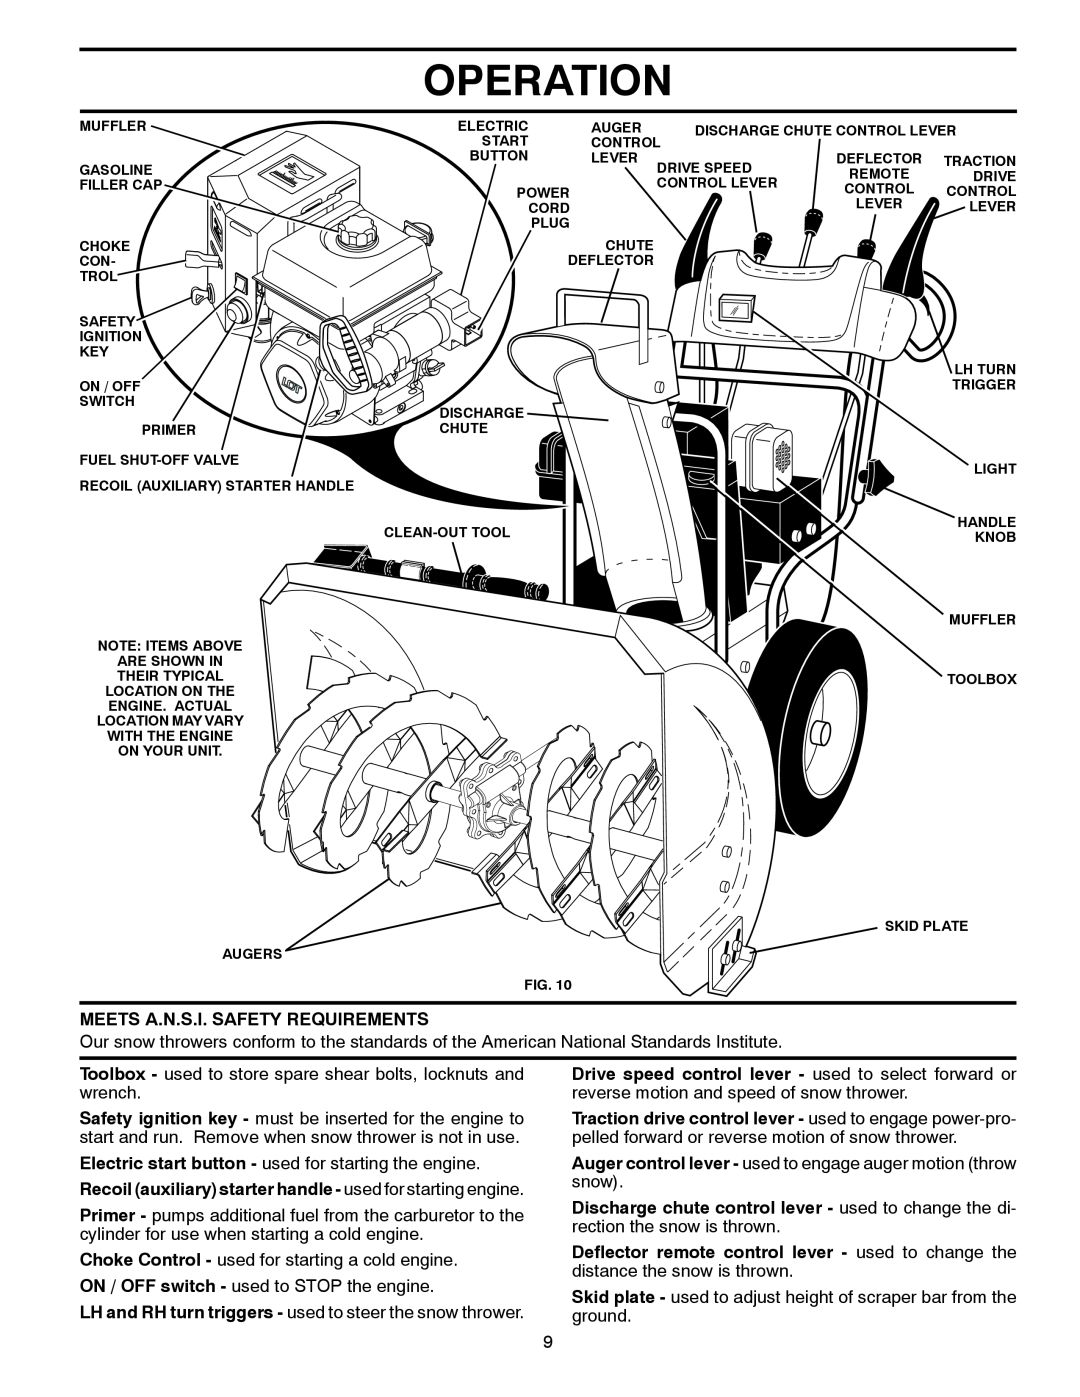 Poulan 429890 owner manual Operation, Meets A.N.S.I. Safety Requirements 